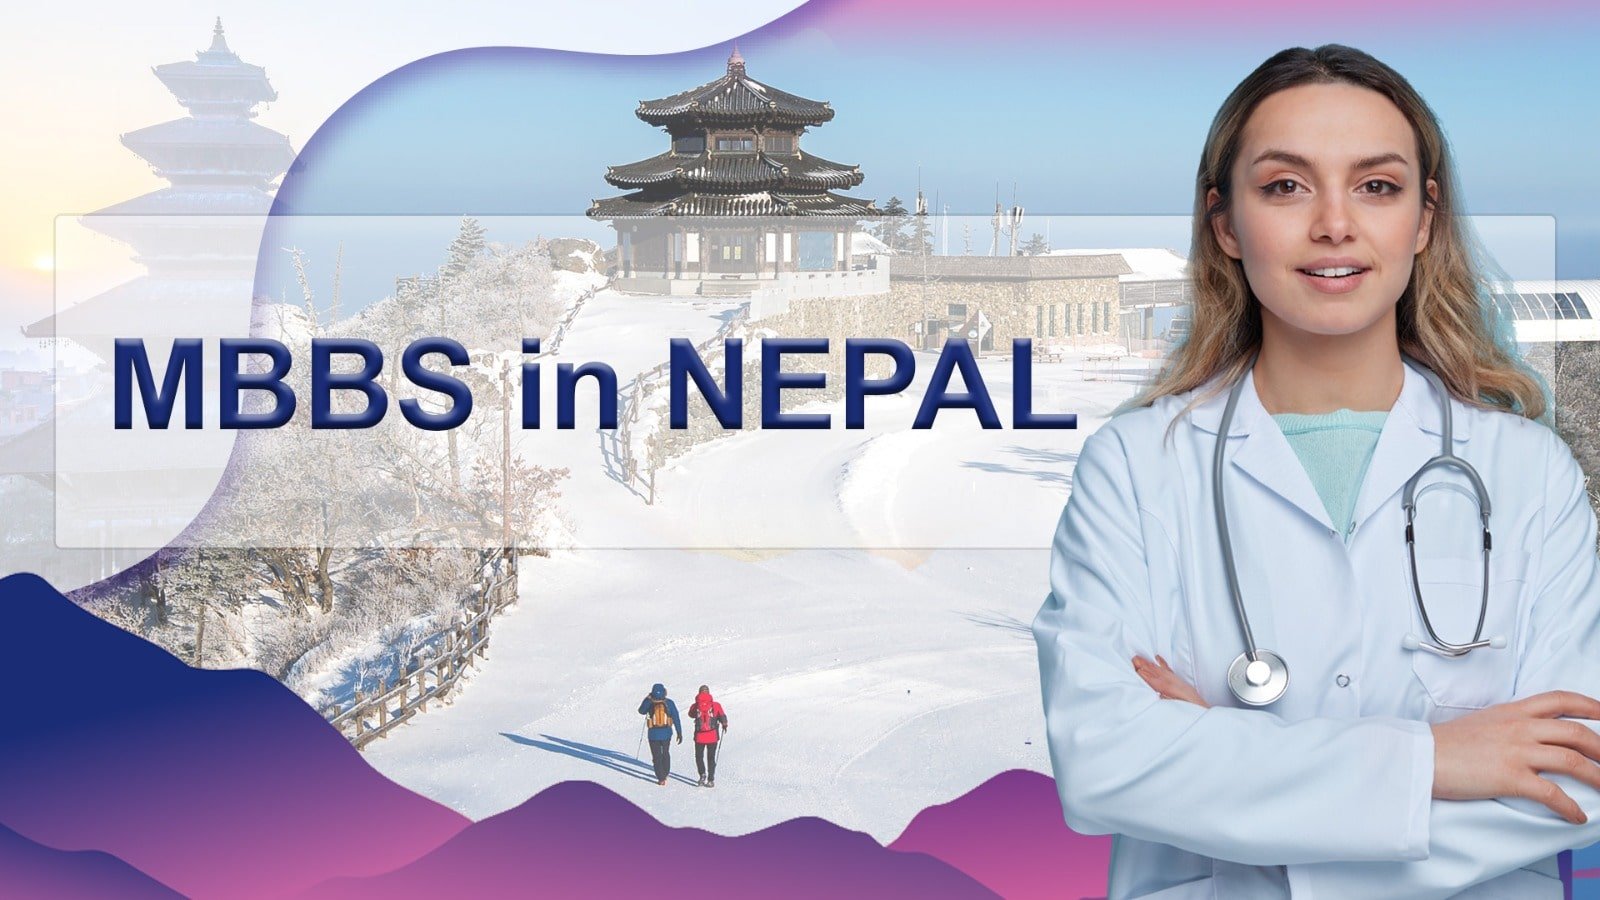 Nepal is the Best Place to Pursue MBBS